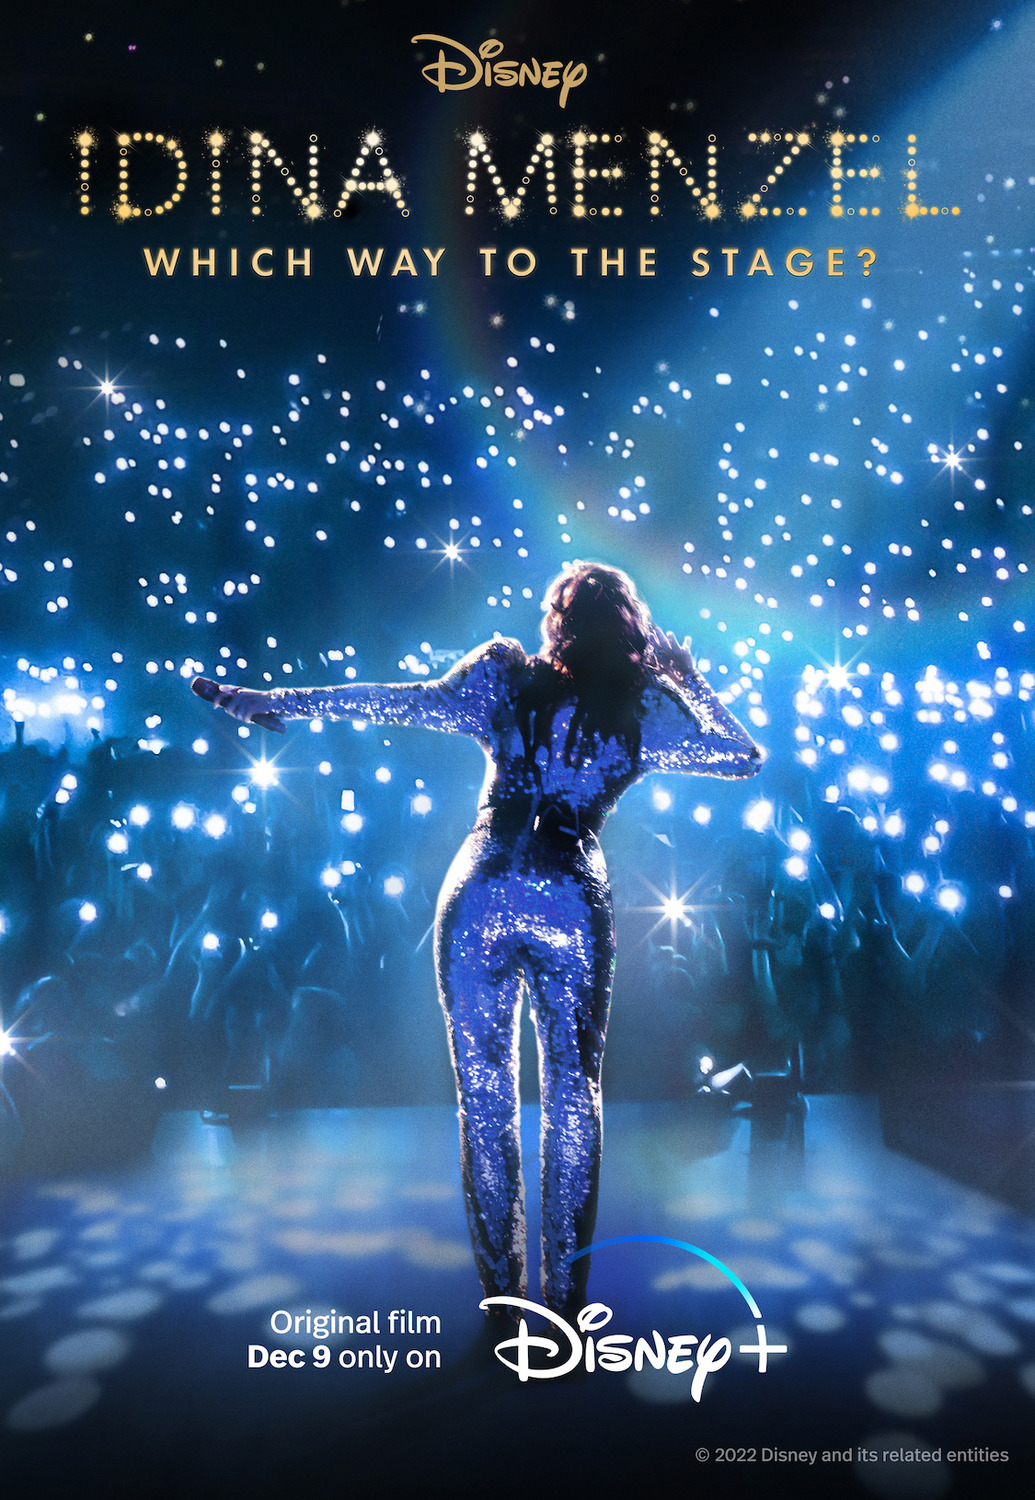 Extra Large Movie Poster Image for Idina Menzel: Which Way to the Stage? 